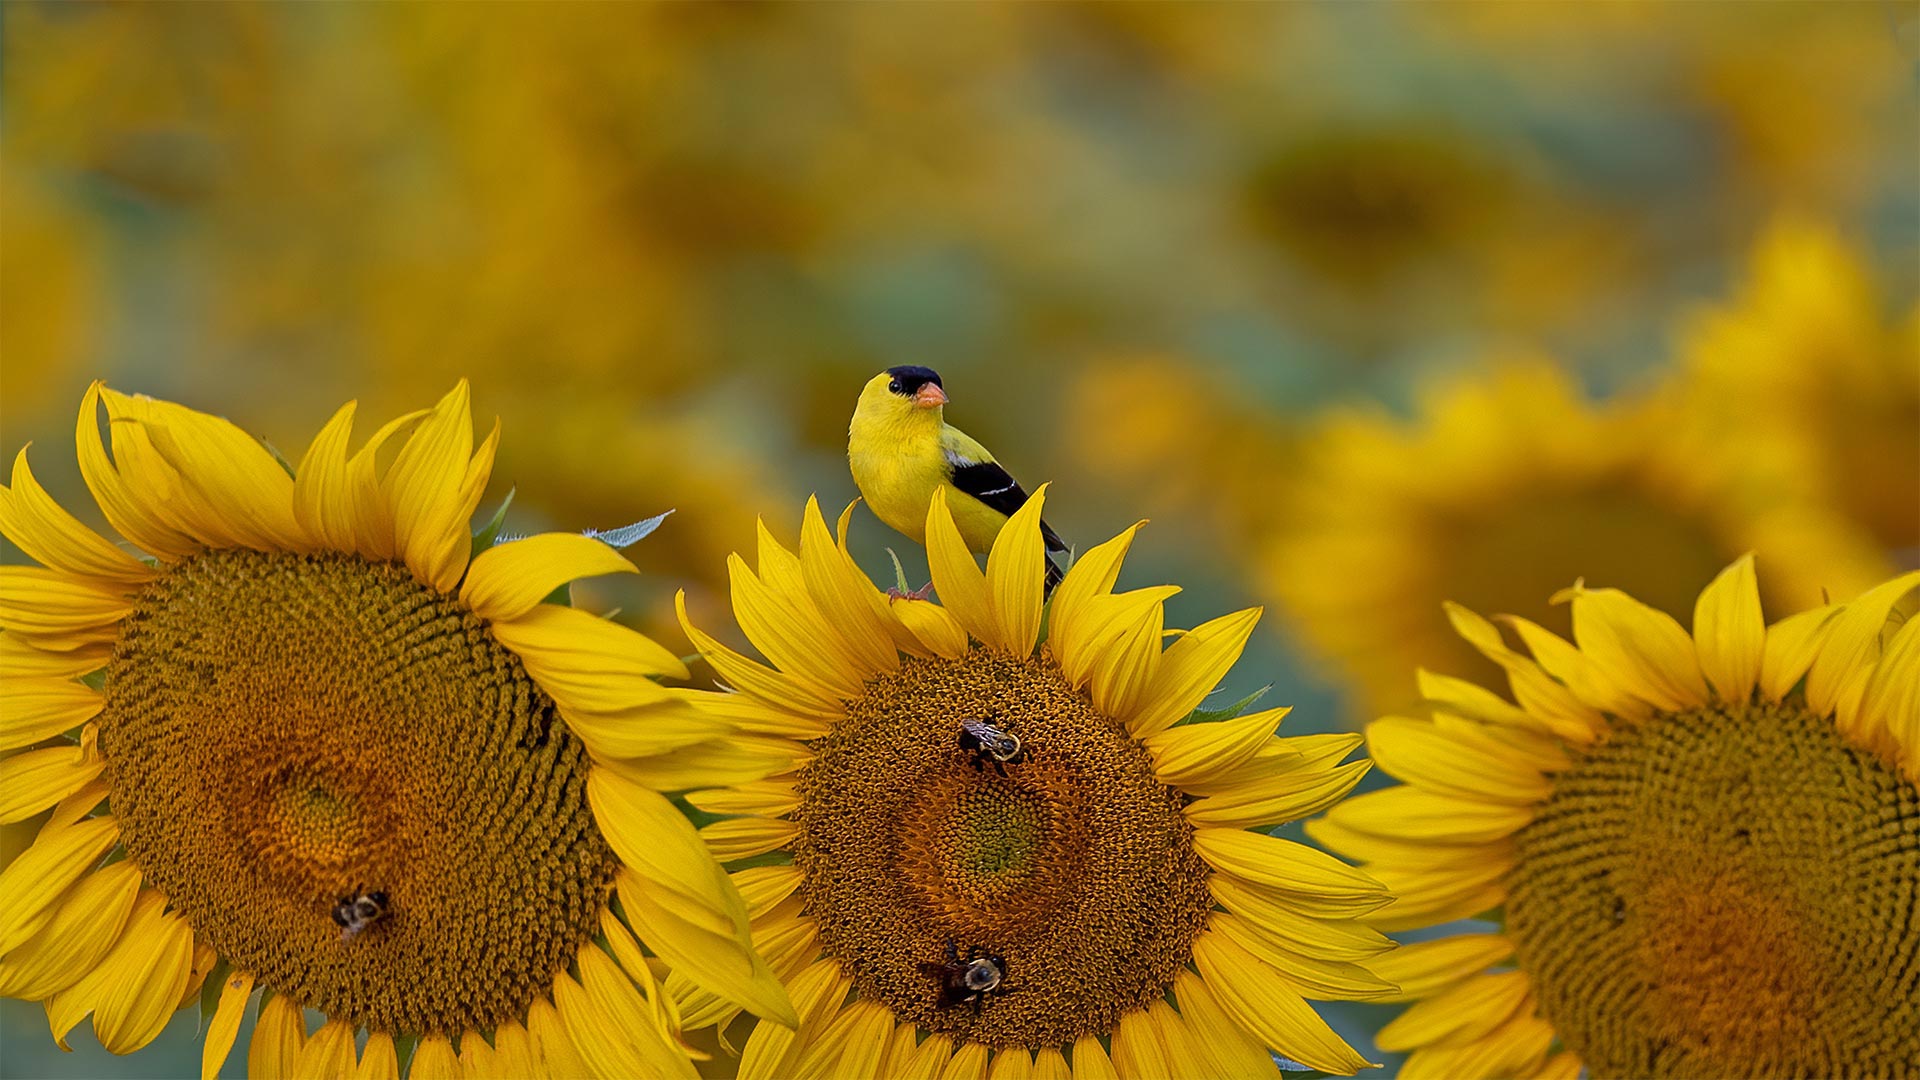 Goldfinch on a sunflower in McConnells, South Carolina - Teresa Kopec/Getty Images)